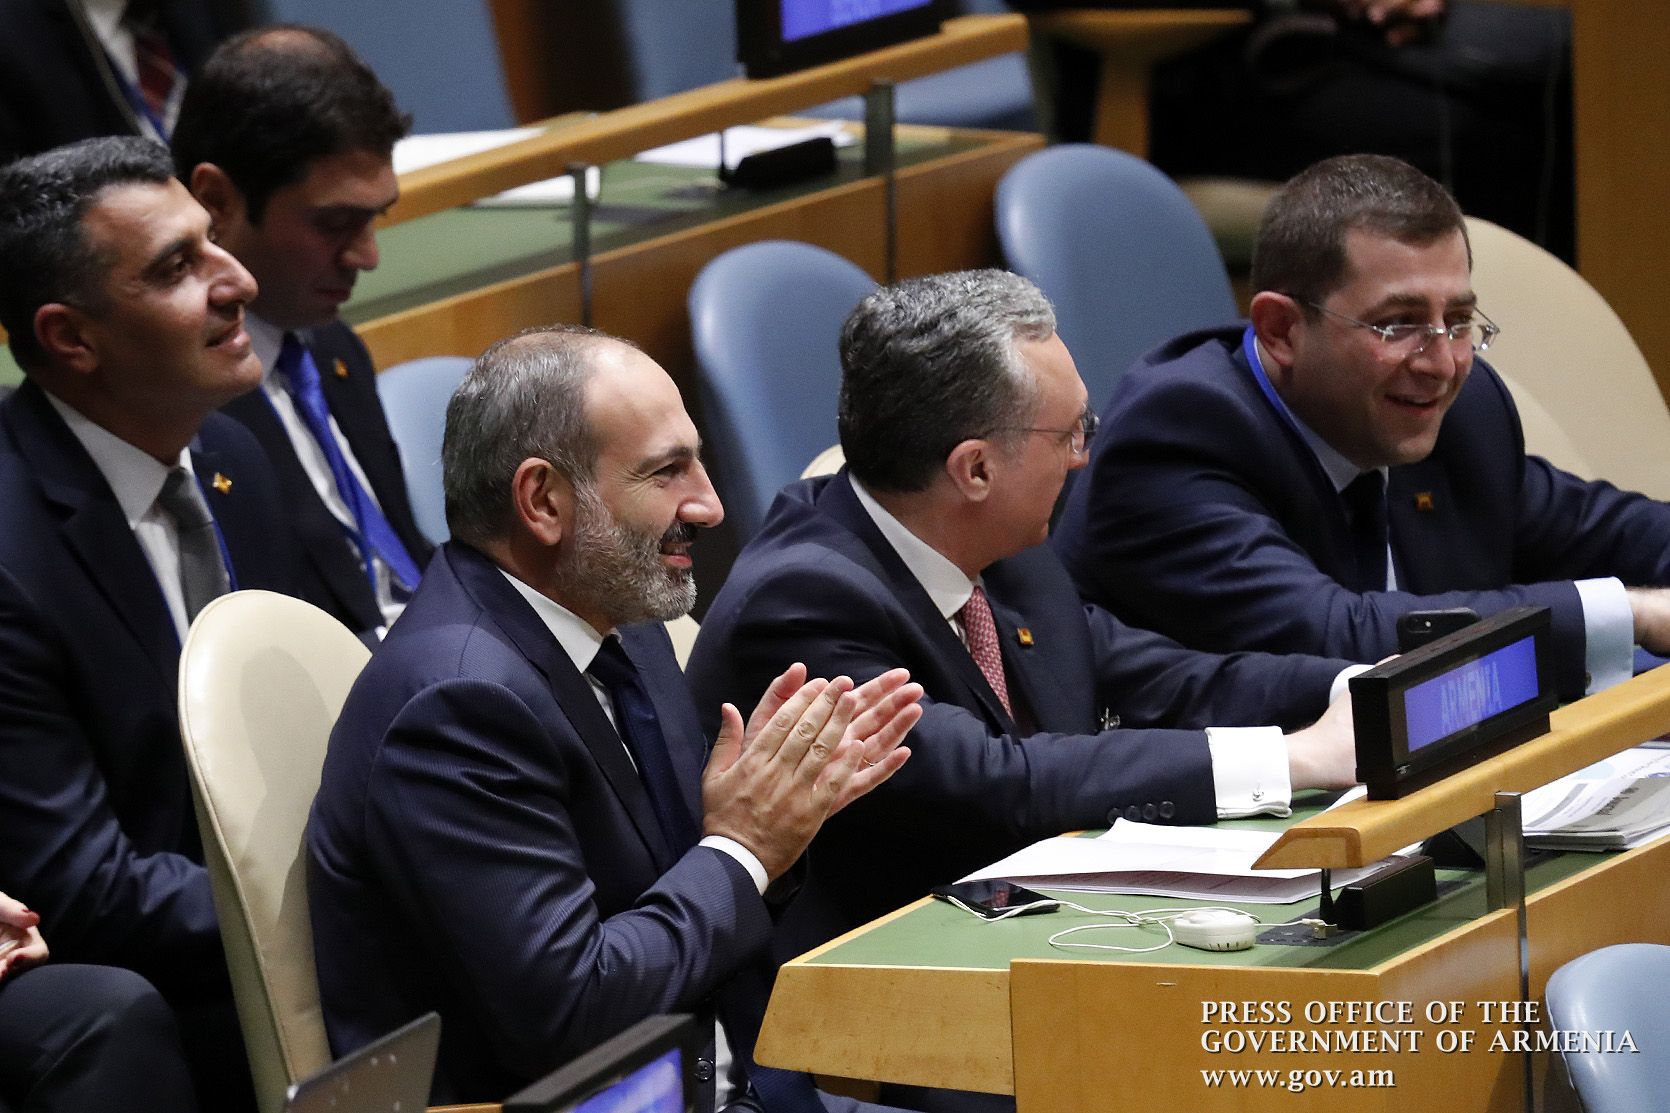 Prime Minister Nikol Pashinyan delivers speech at UN General Assembly